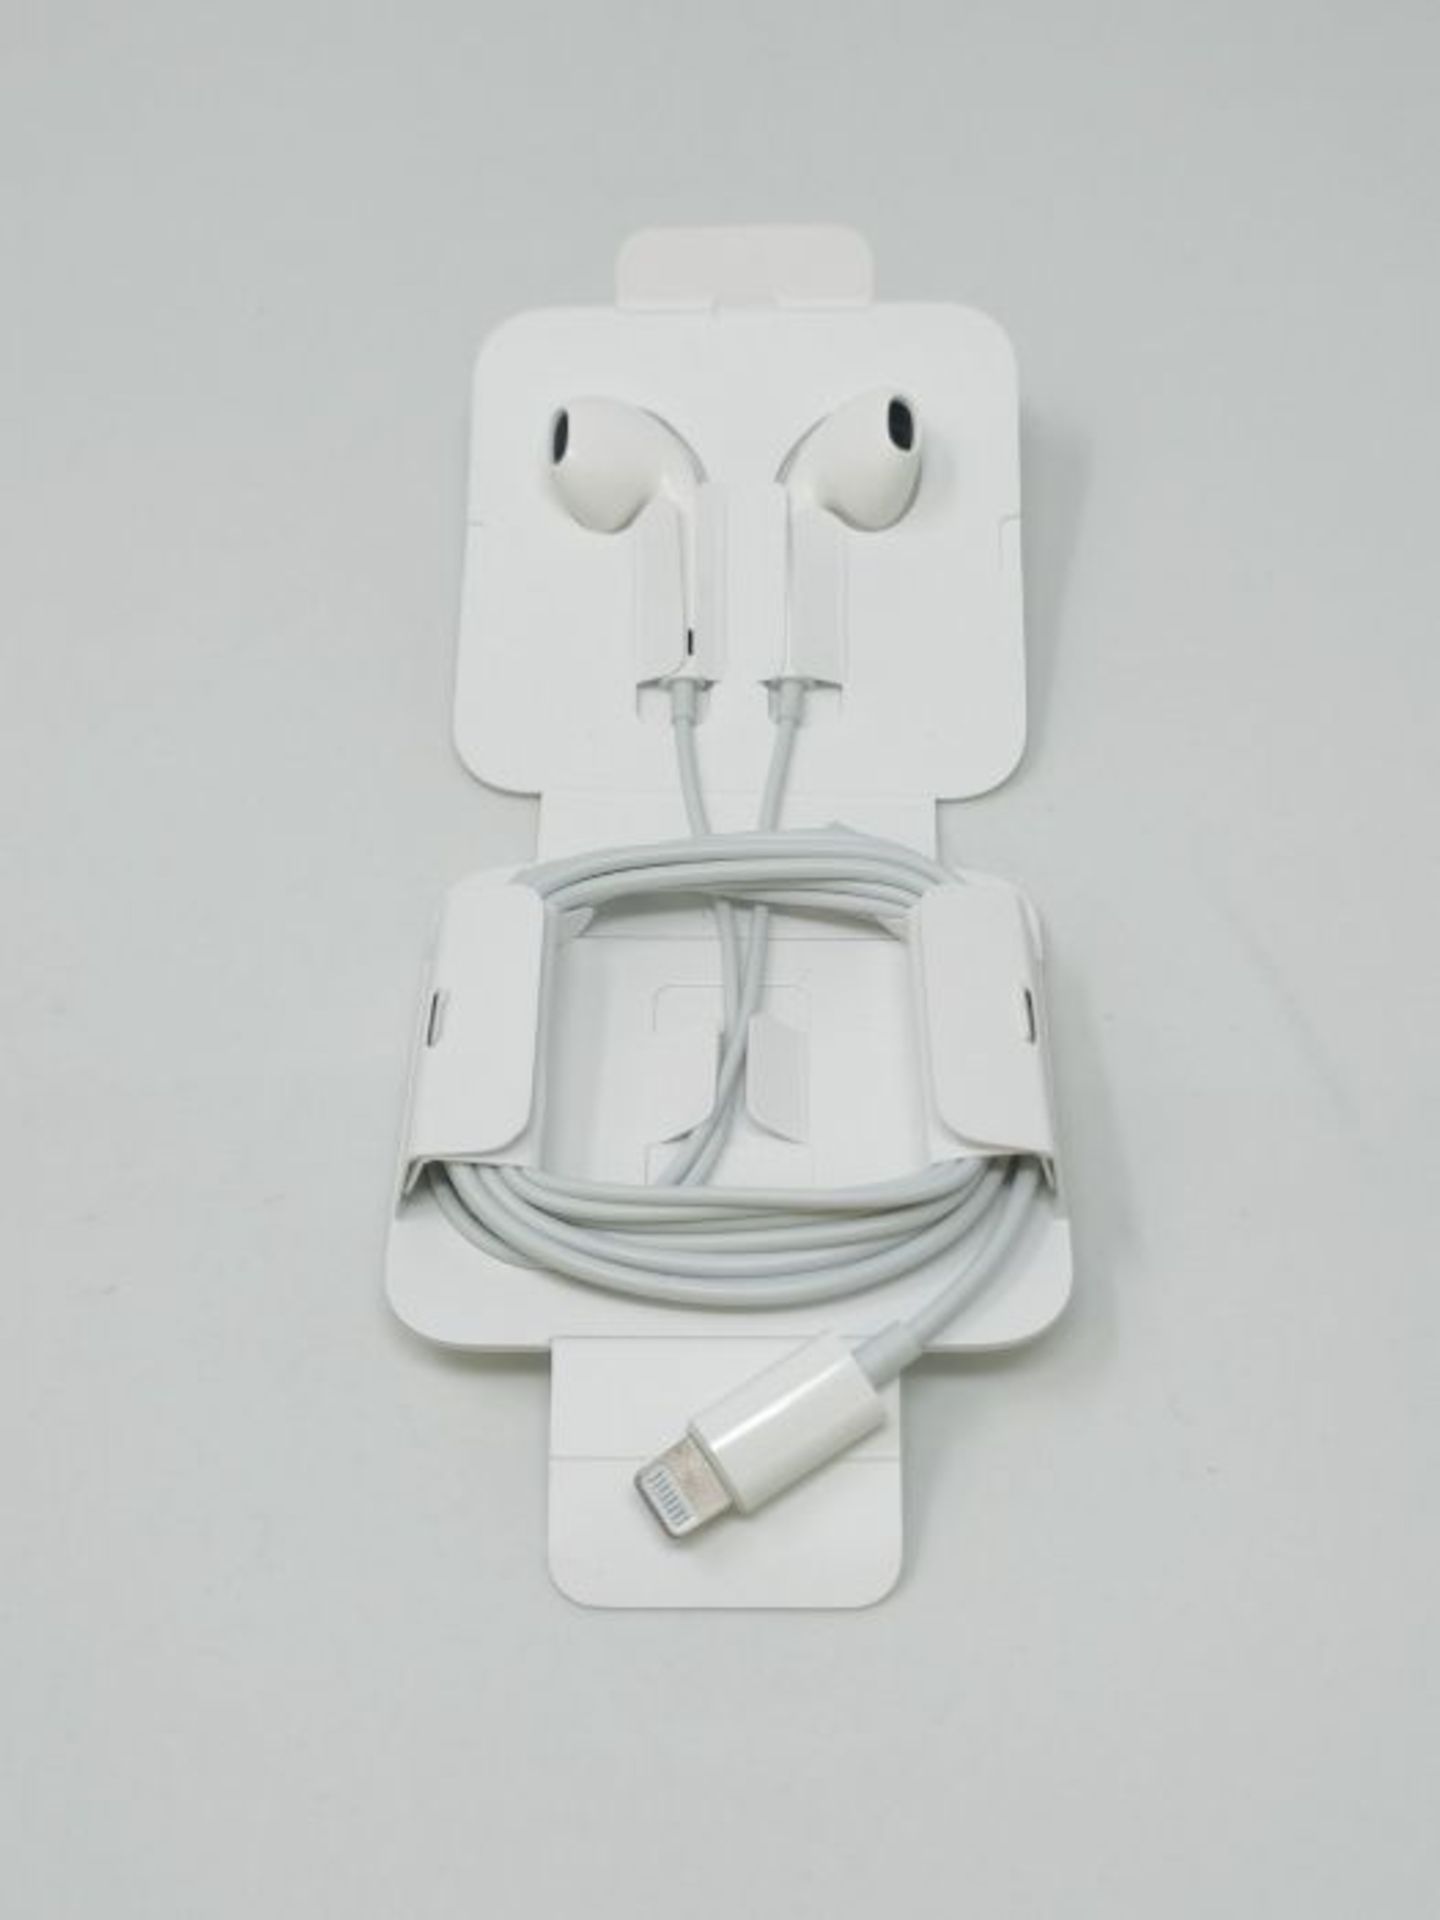 Apple EarPods with Lightning Connector - White - Image 3 of 3